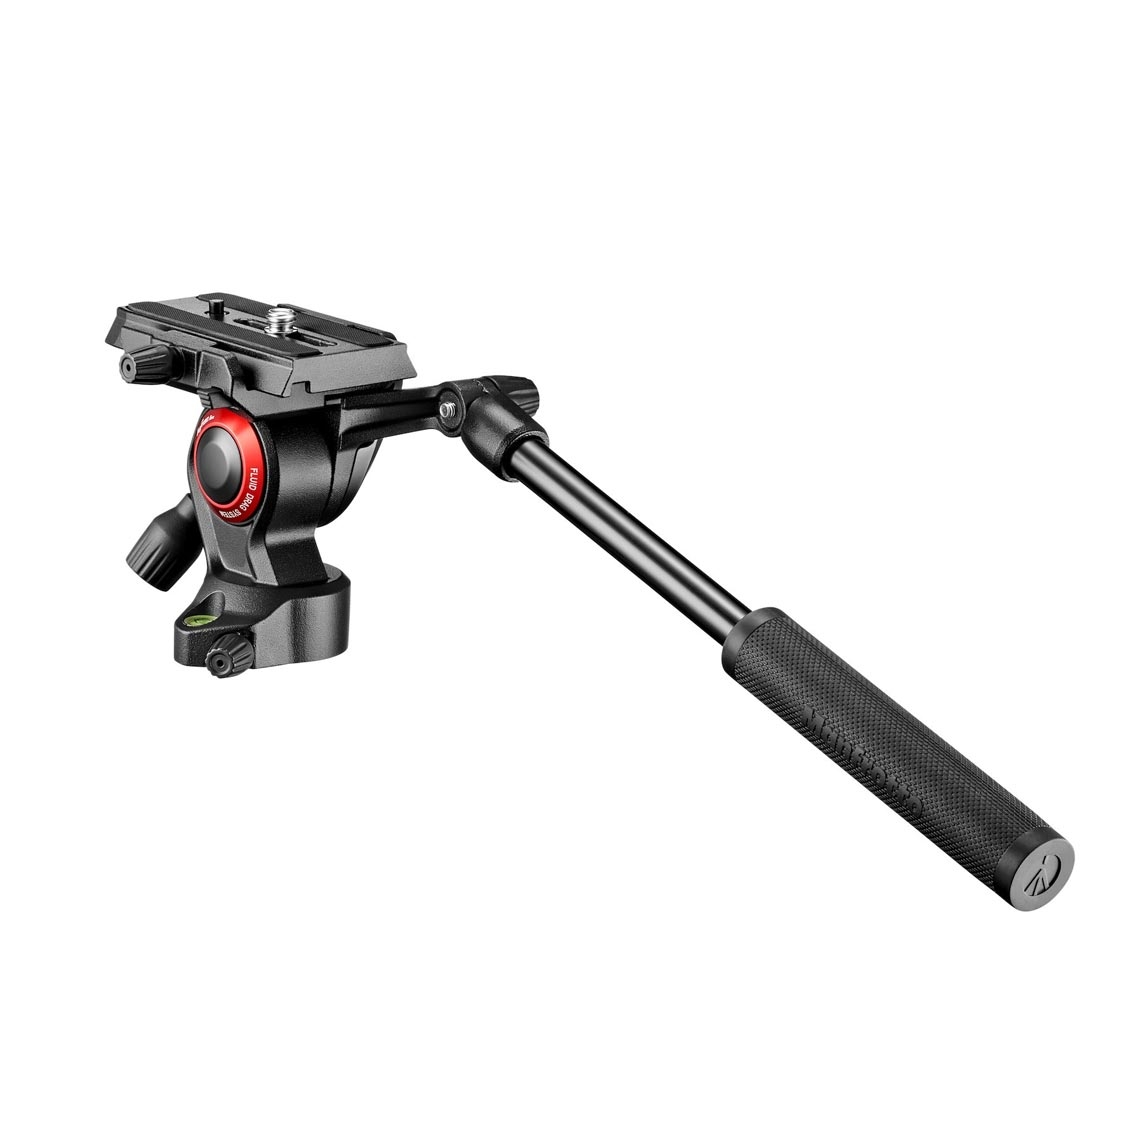 Manfrotto 400AH Video Head